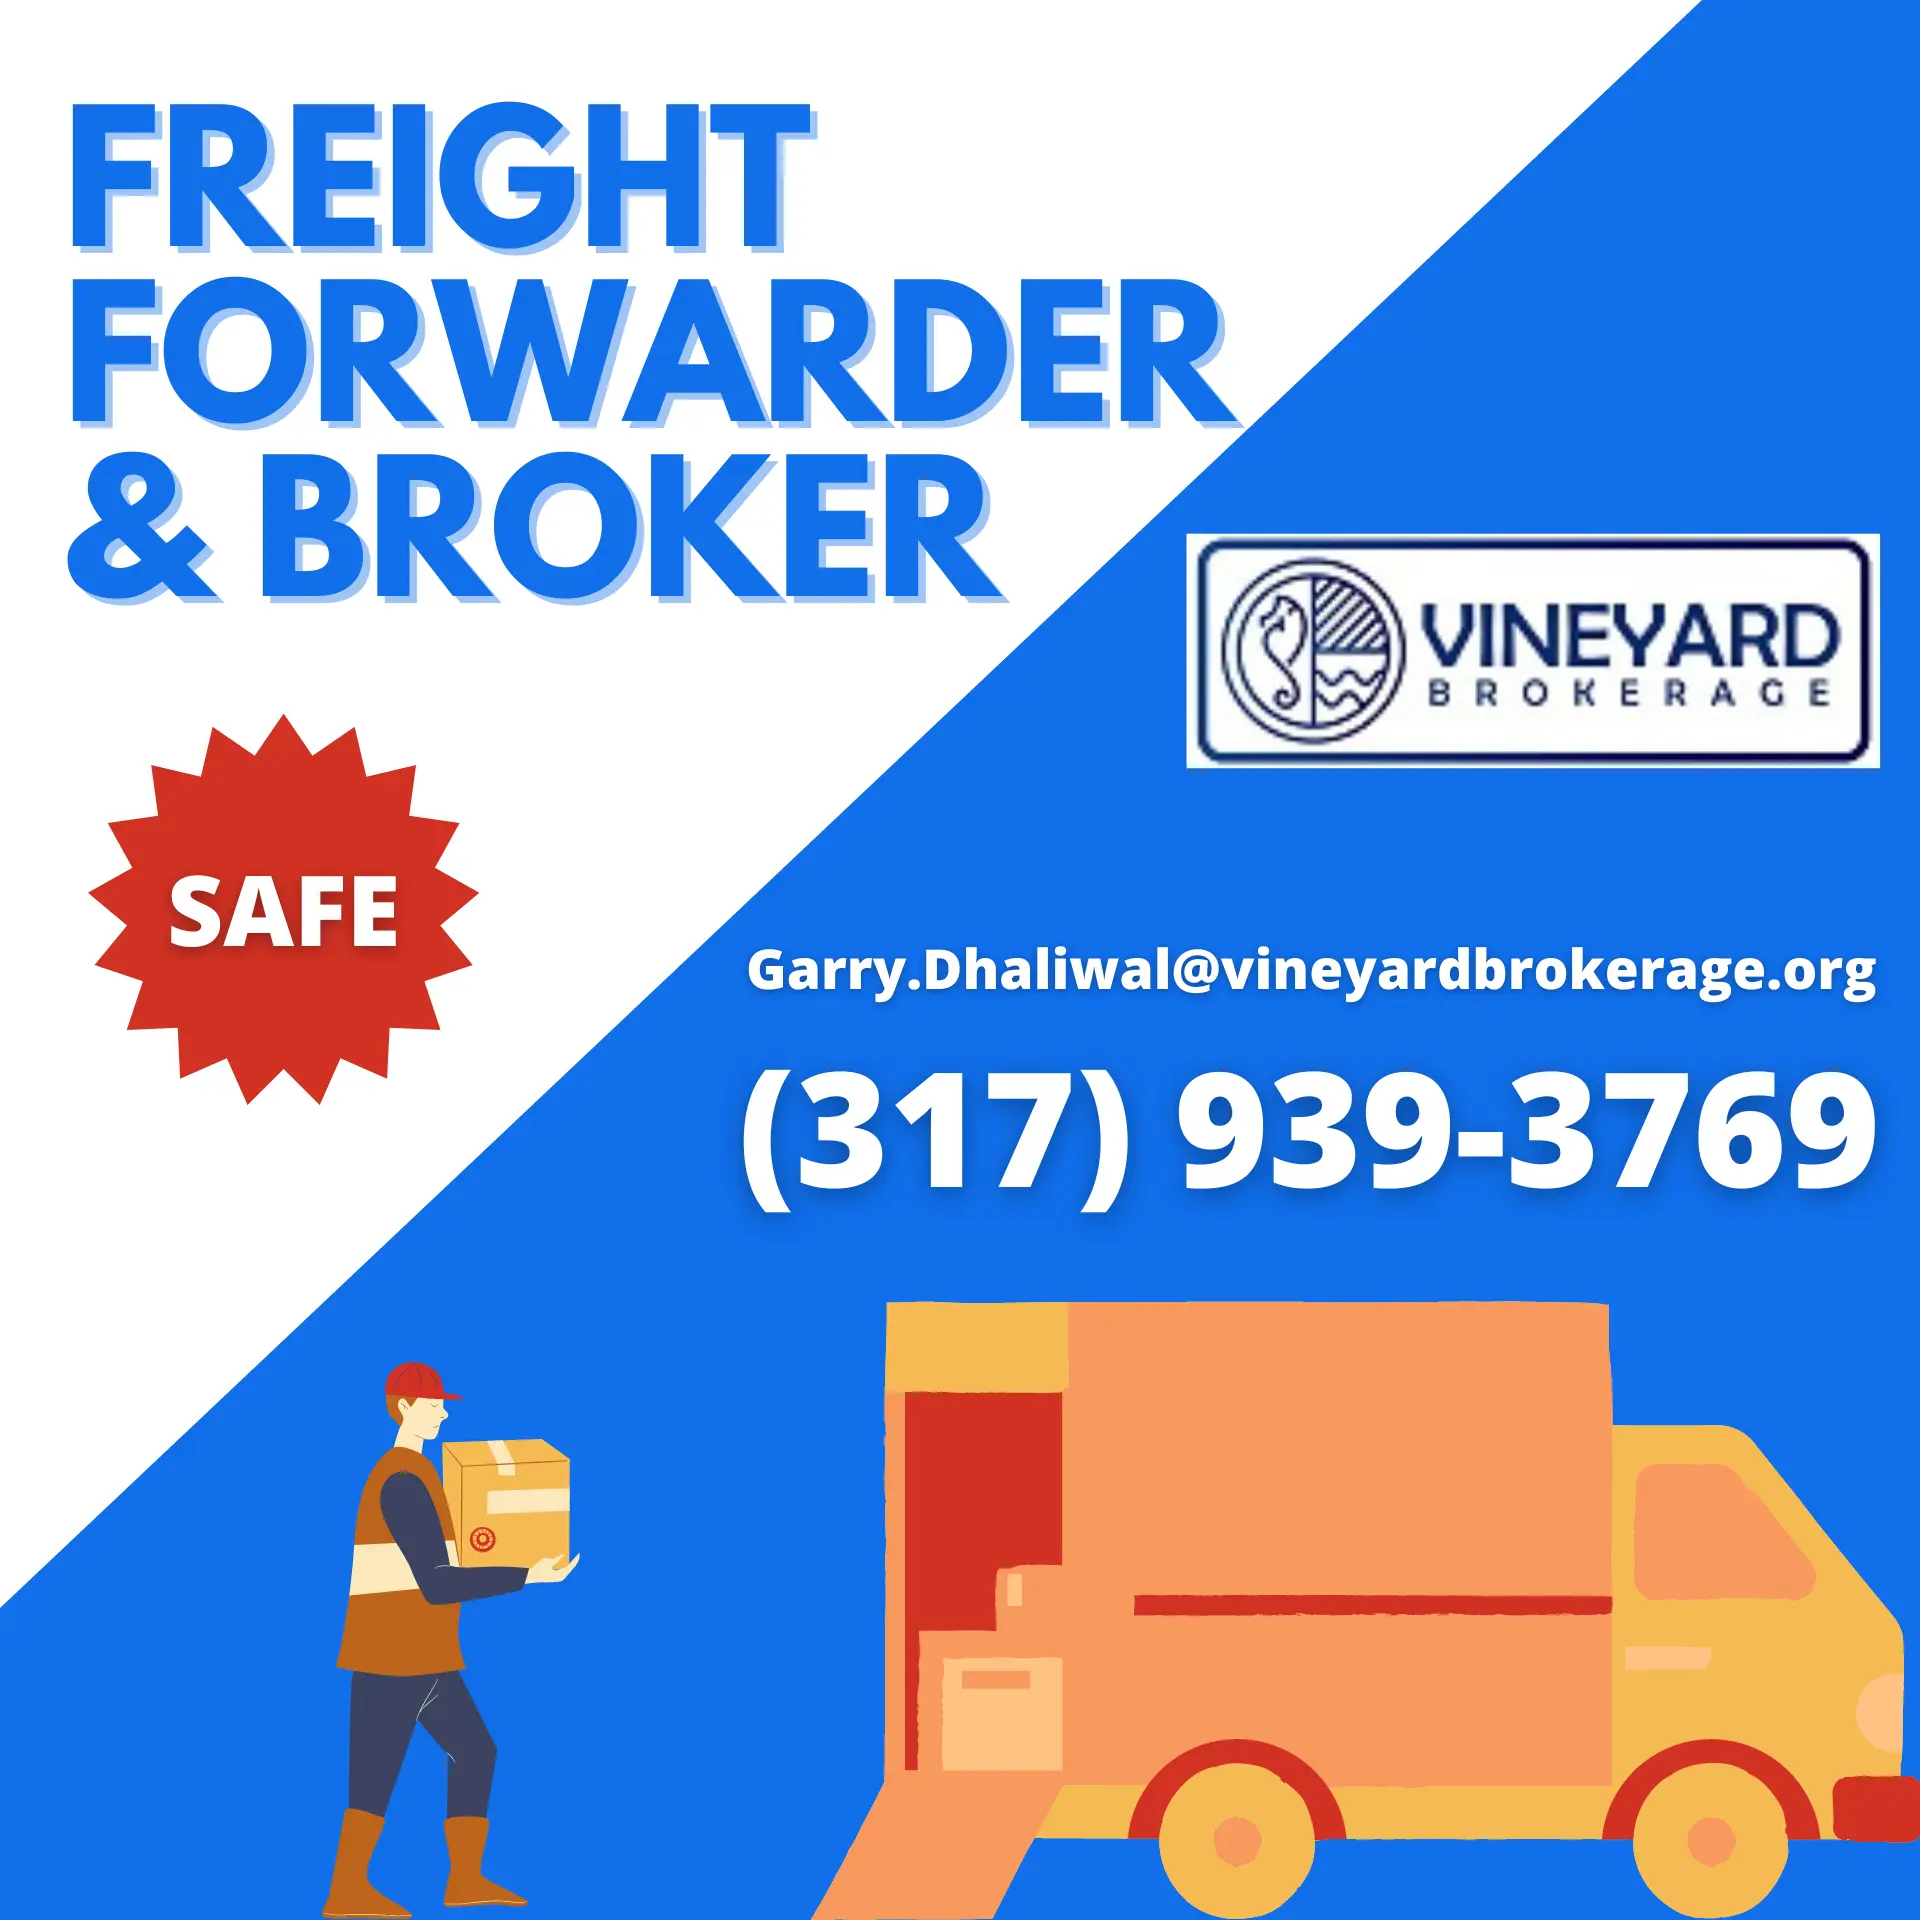 Know the difference between a freight forwarder and a Broker